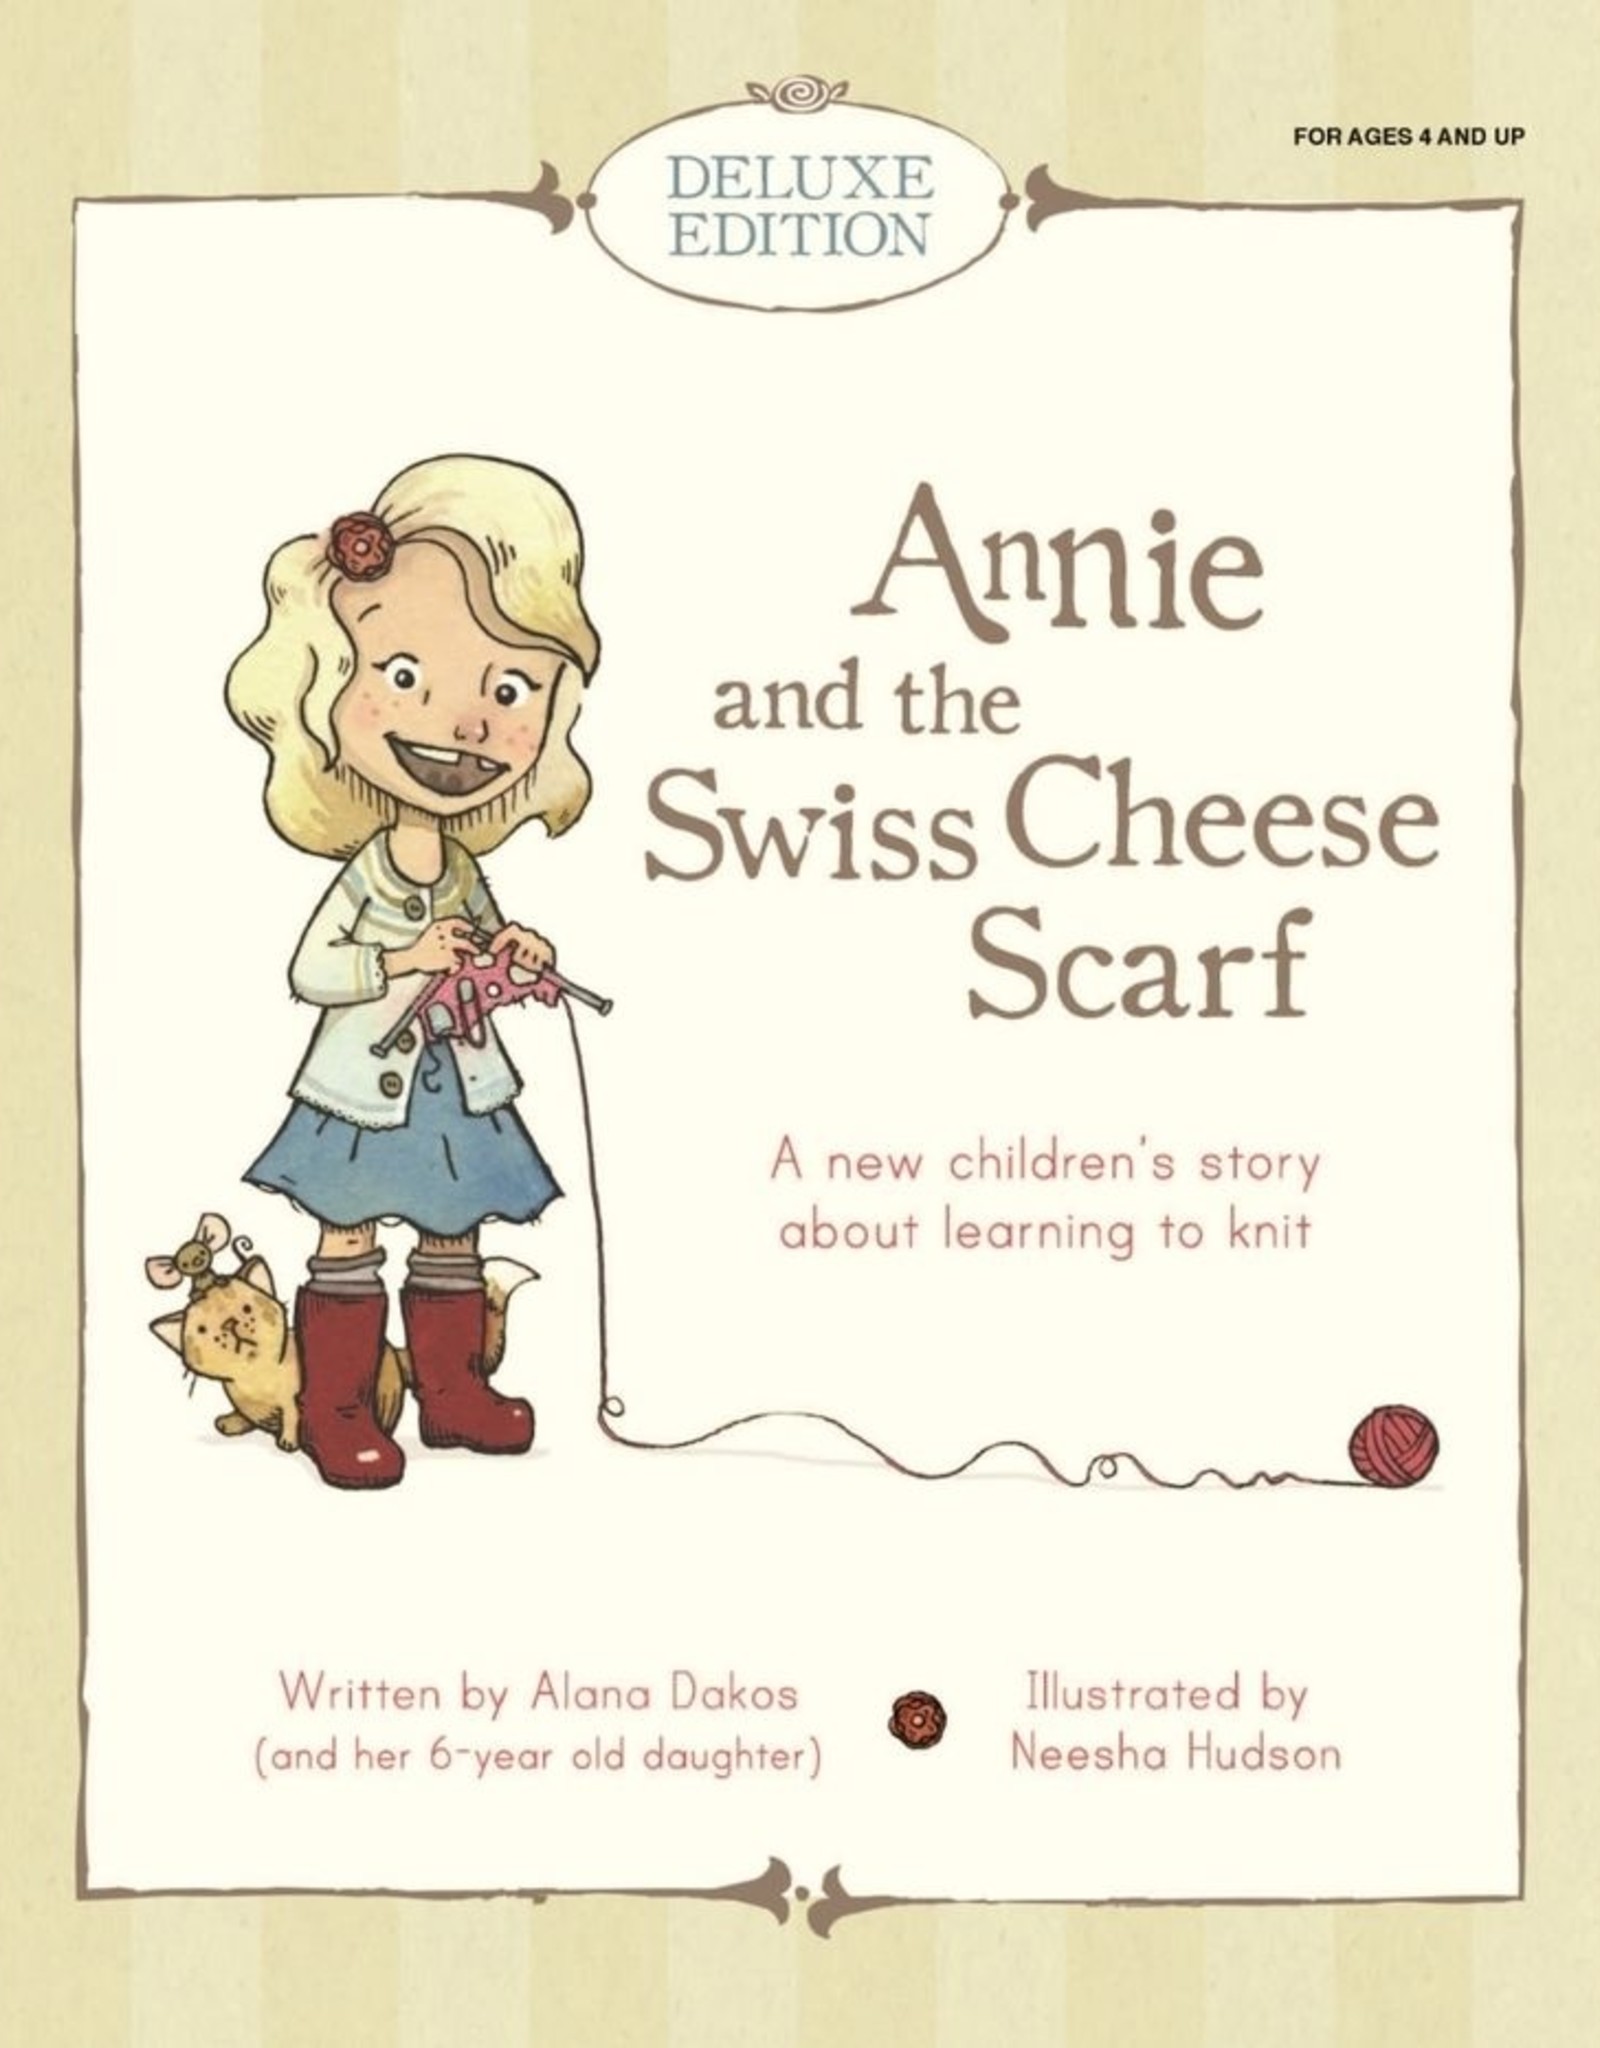 Deluxe Edition Annie and the Swiss Cheese Scarf